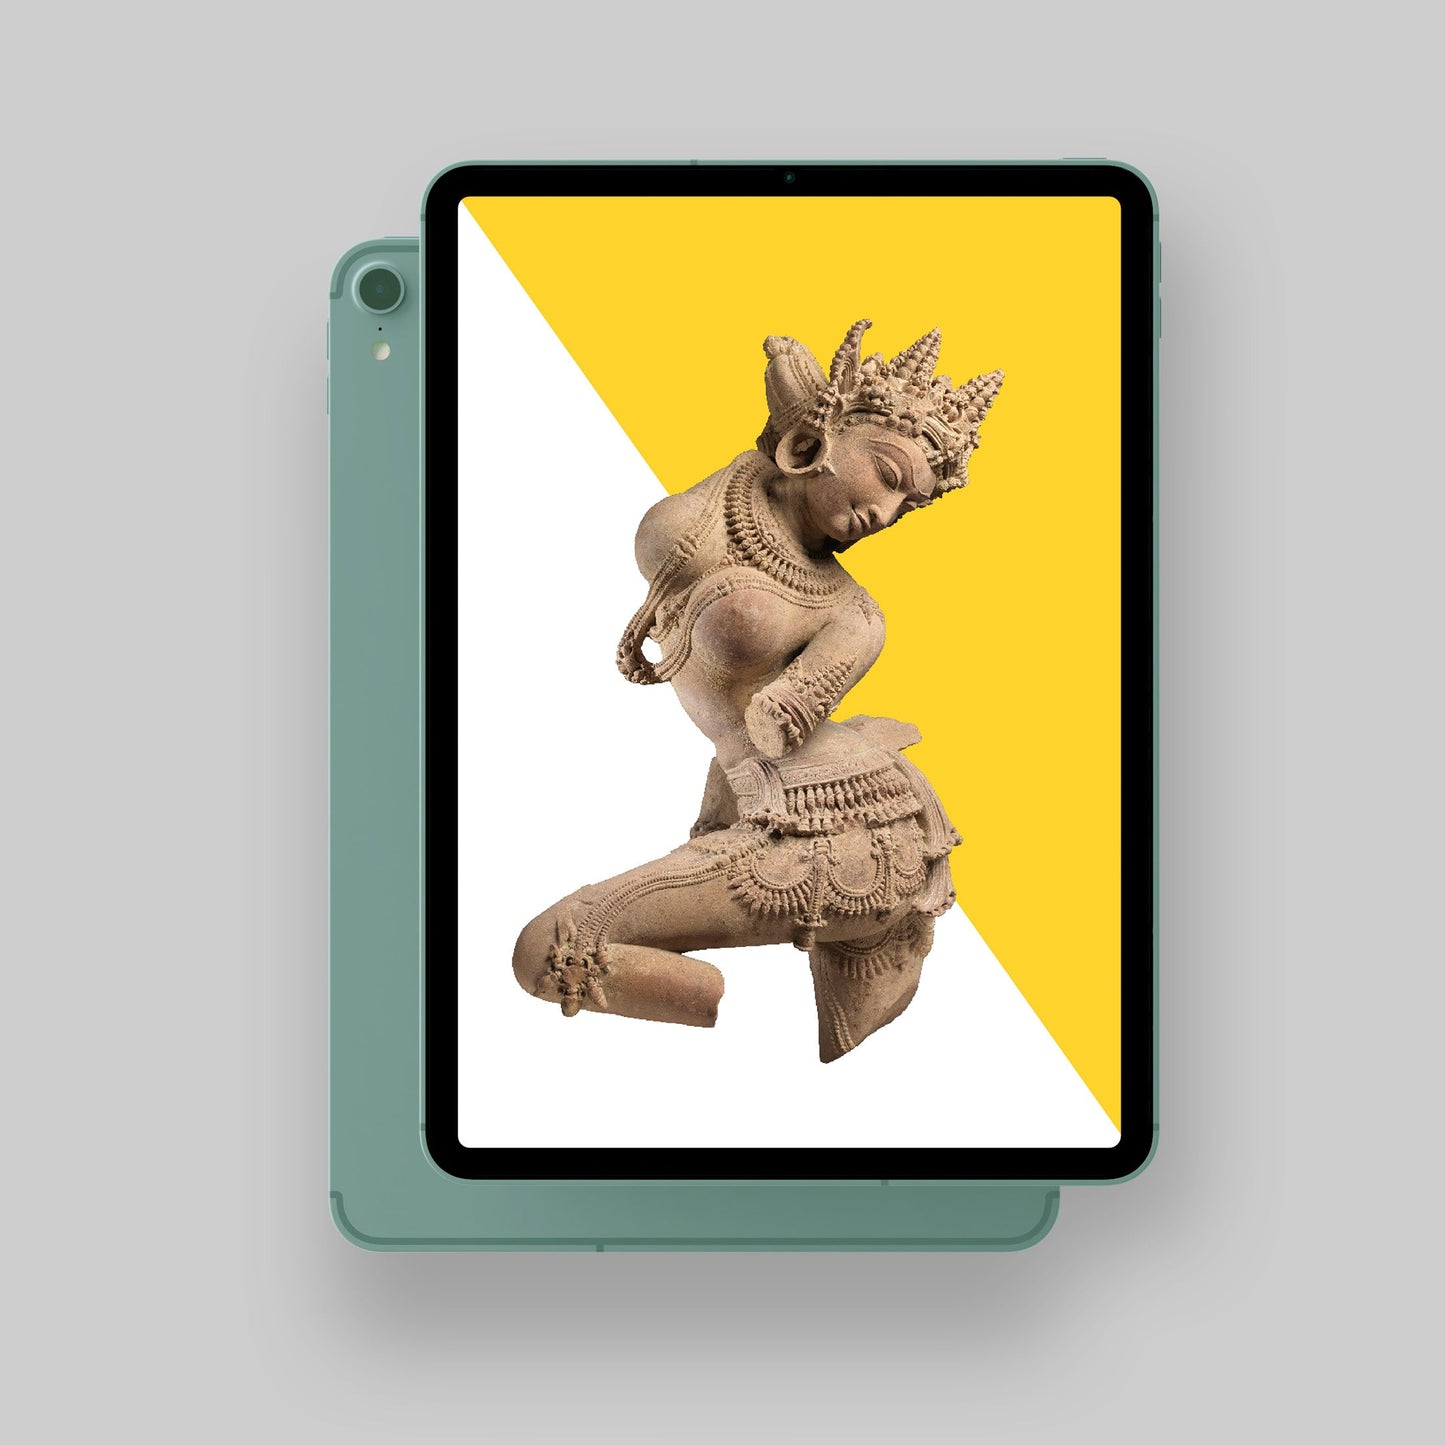 Mockup of the digital version of the first issue of Convergence Magazine, in English, on a tablet, showing an Indian medieval sculpture on a yellow and white background